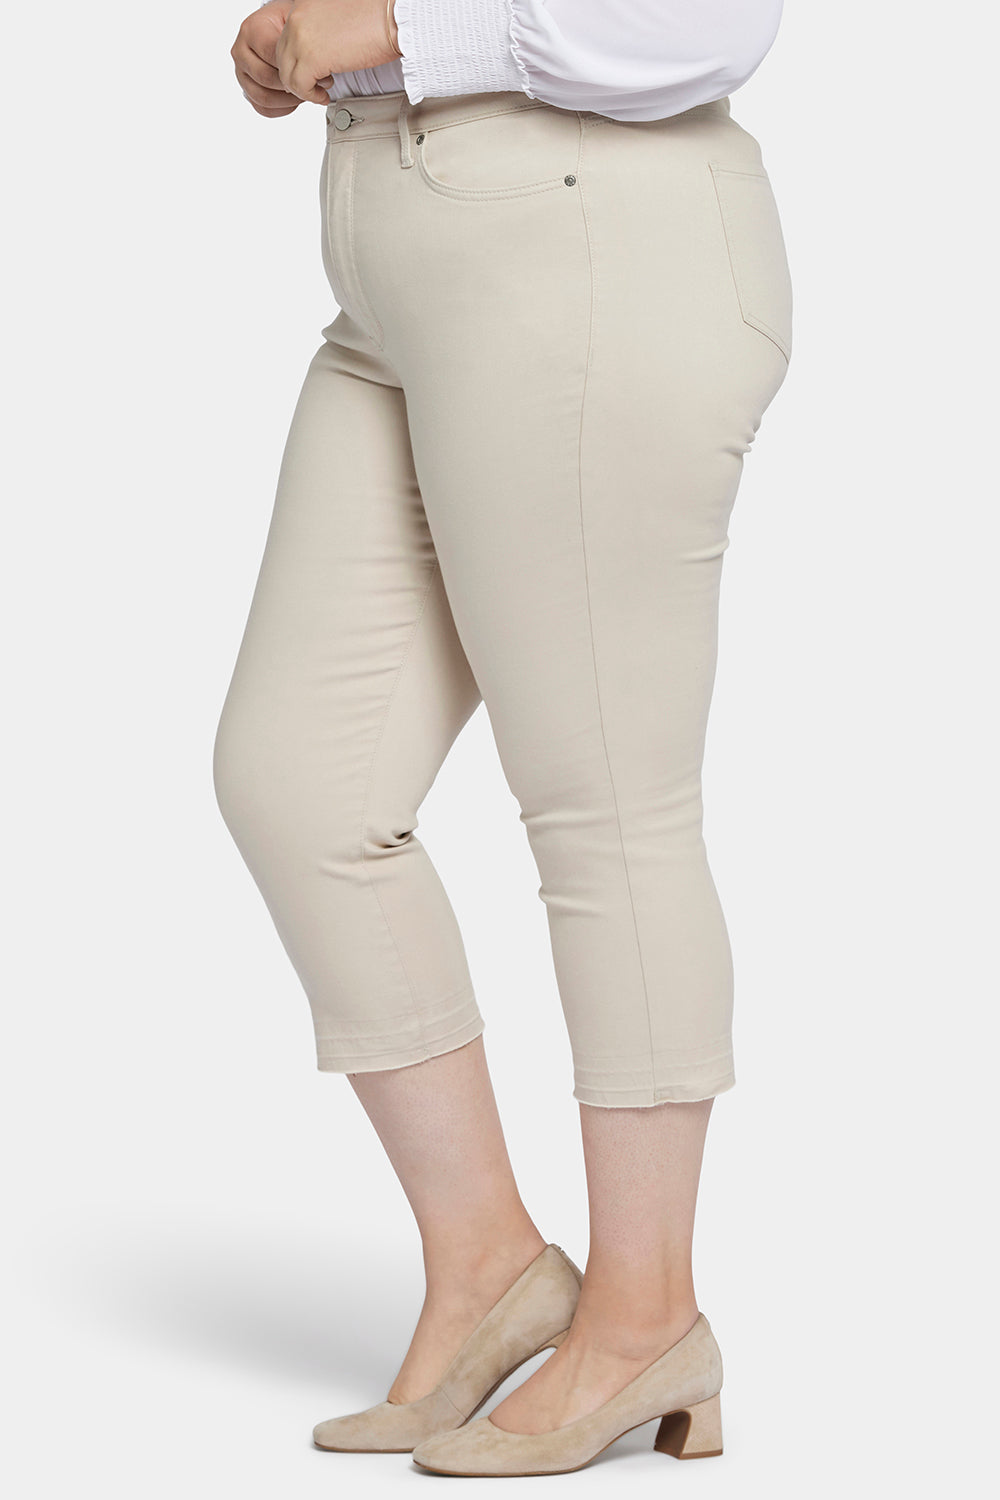 NYDJ Chloe Capri Jeans In Plus Size With High Rise And Released Hems - Feather